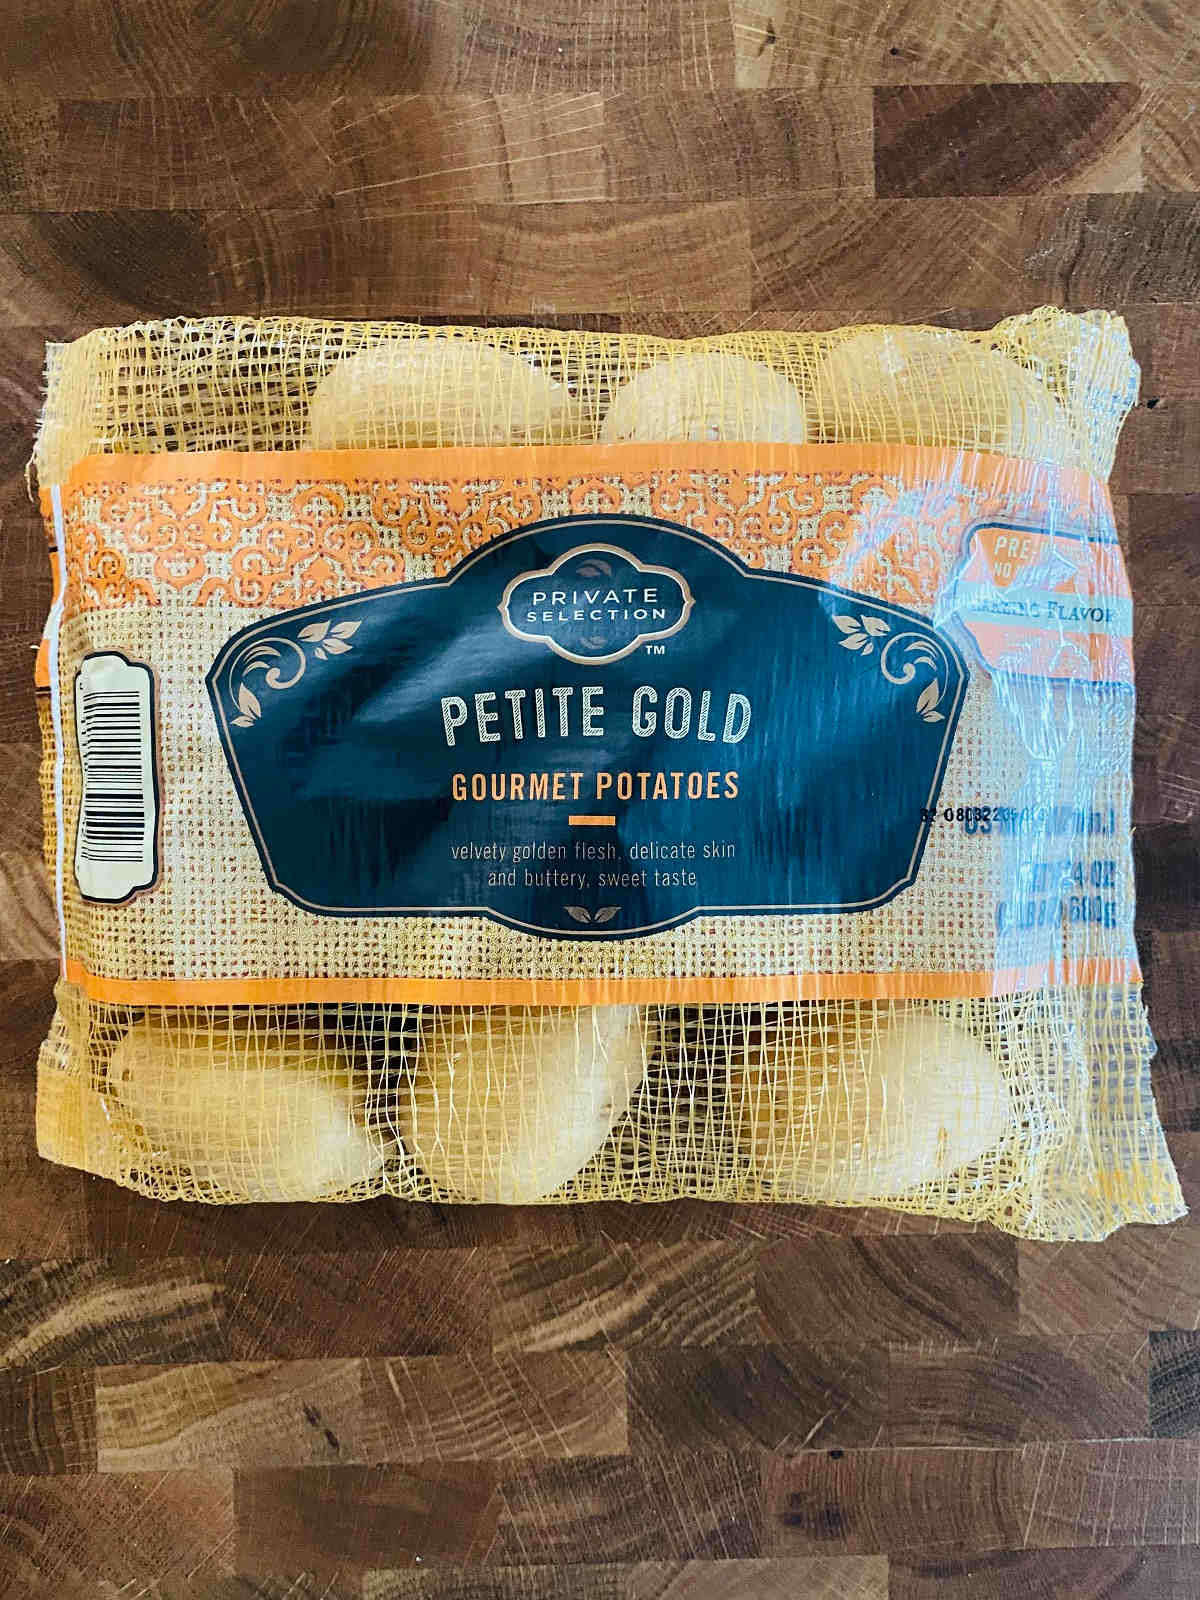 bag of Safeway private selection petite gold potatoes